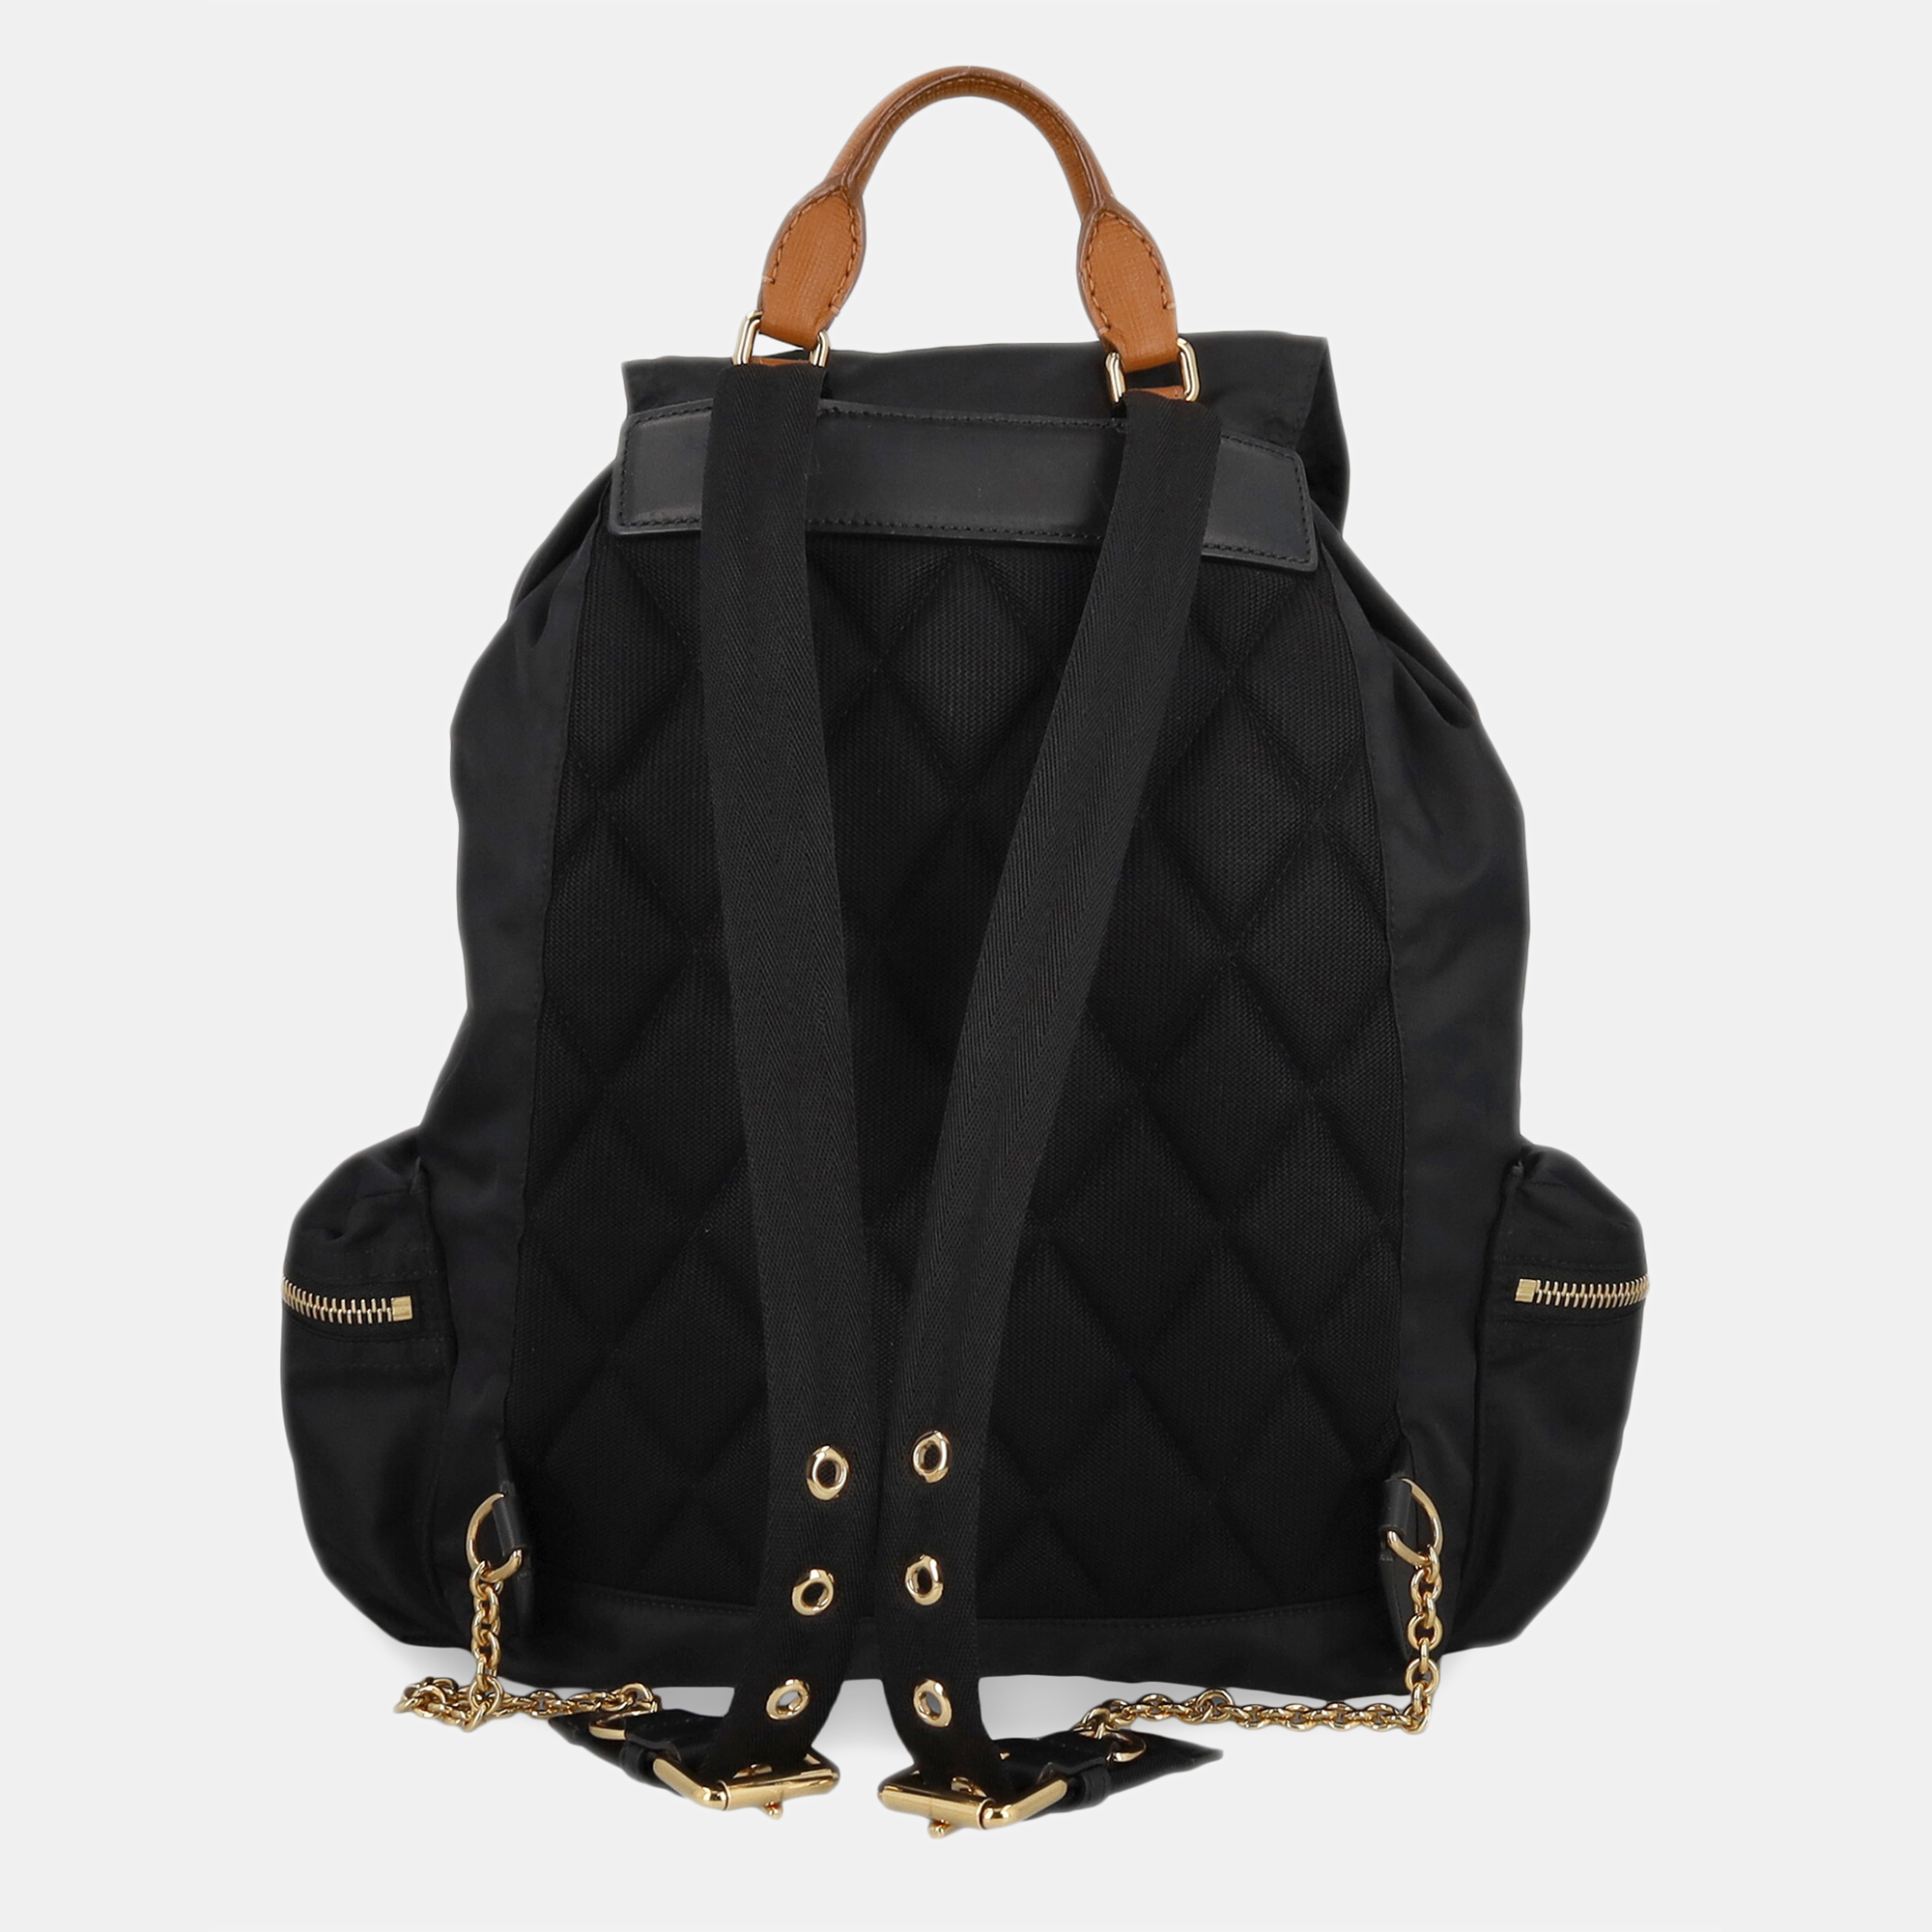 Burberry  Women's Synthetic Fibers Backpack - Black - One Size